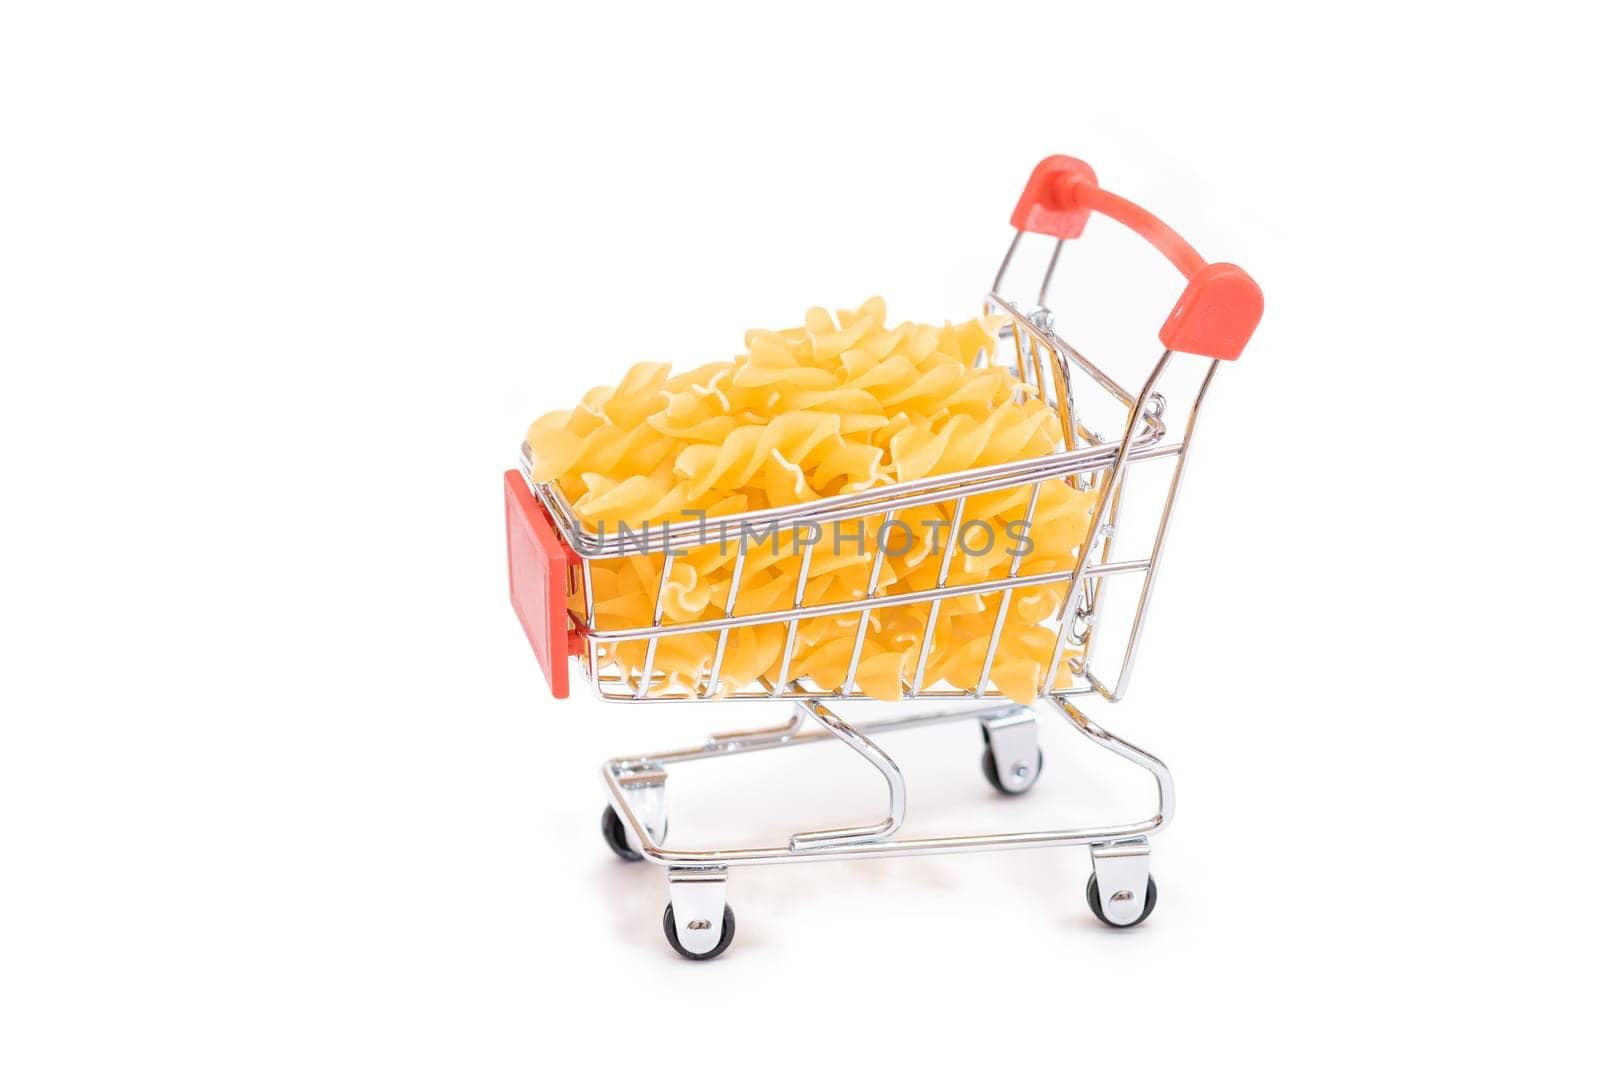 Uncooked Fusilli Pasta in Small Shopping Cart Isolated on White by InfinitumProdux